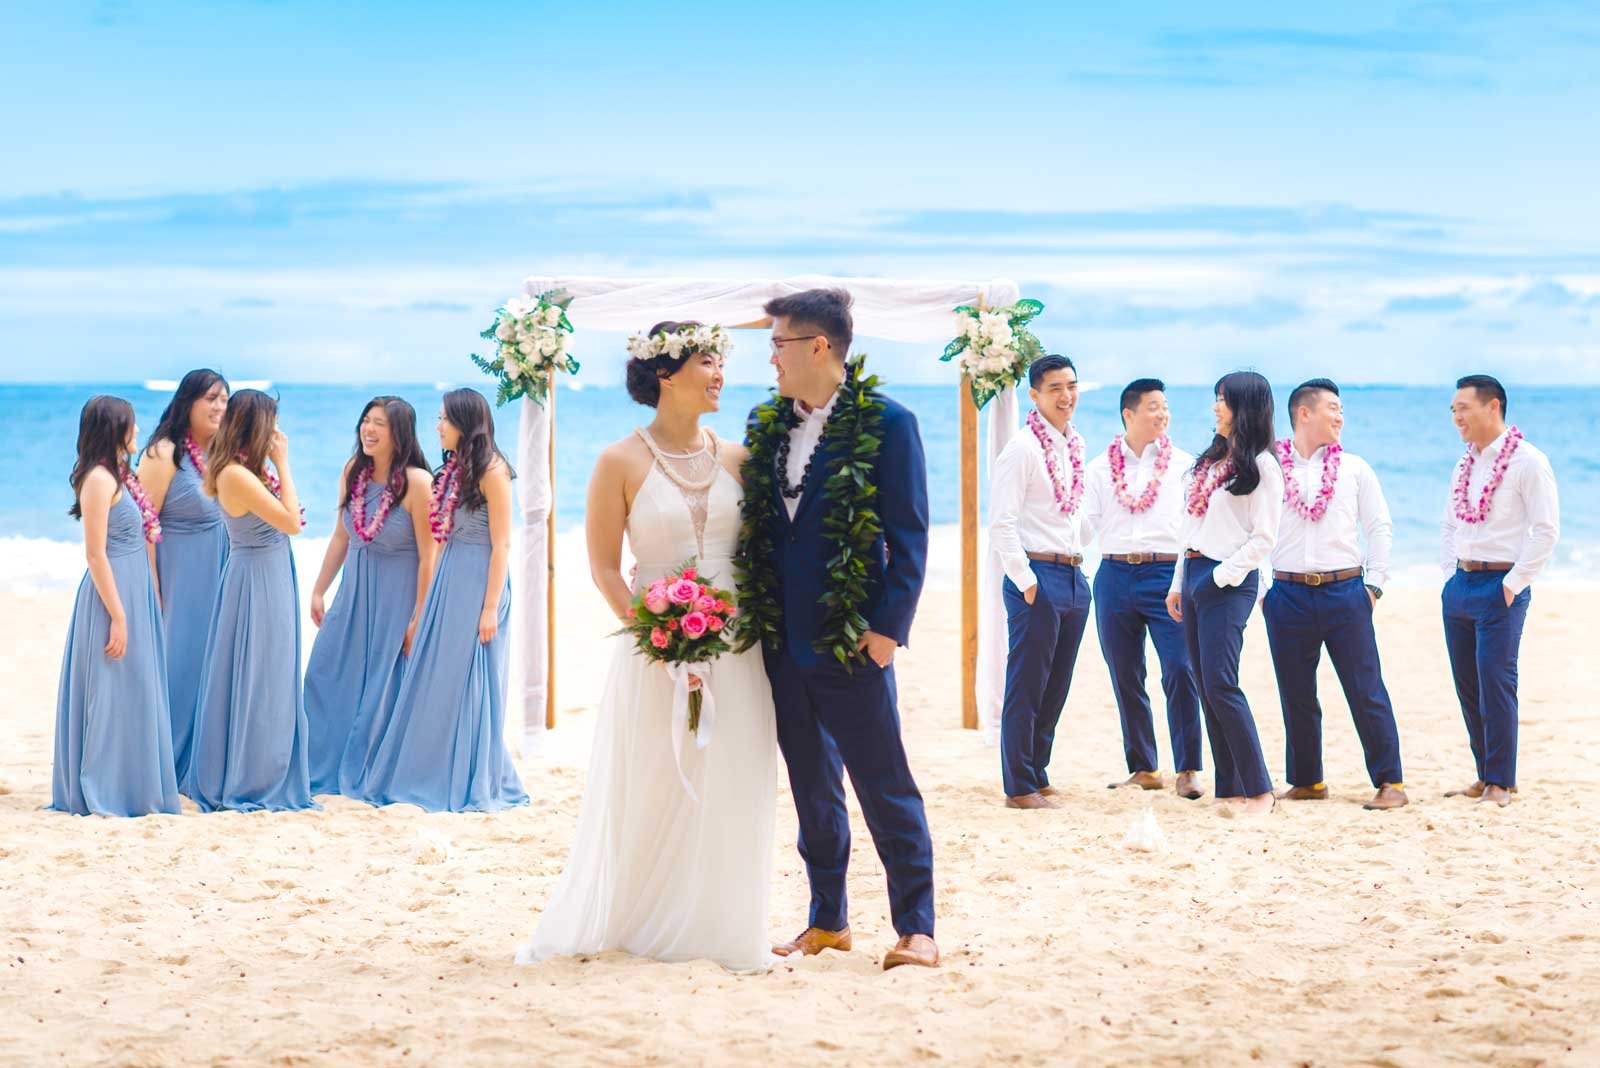 Small wedding with bridal party at beach wedding in Hawaii